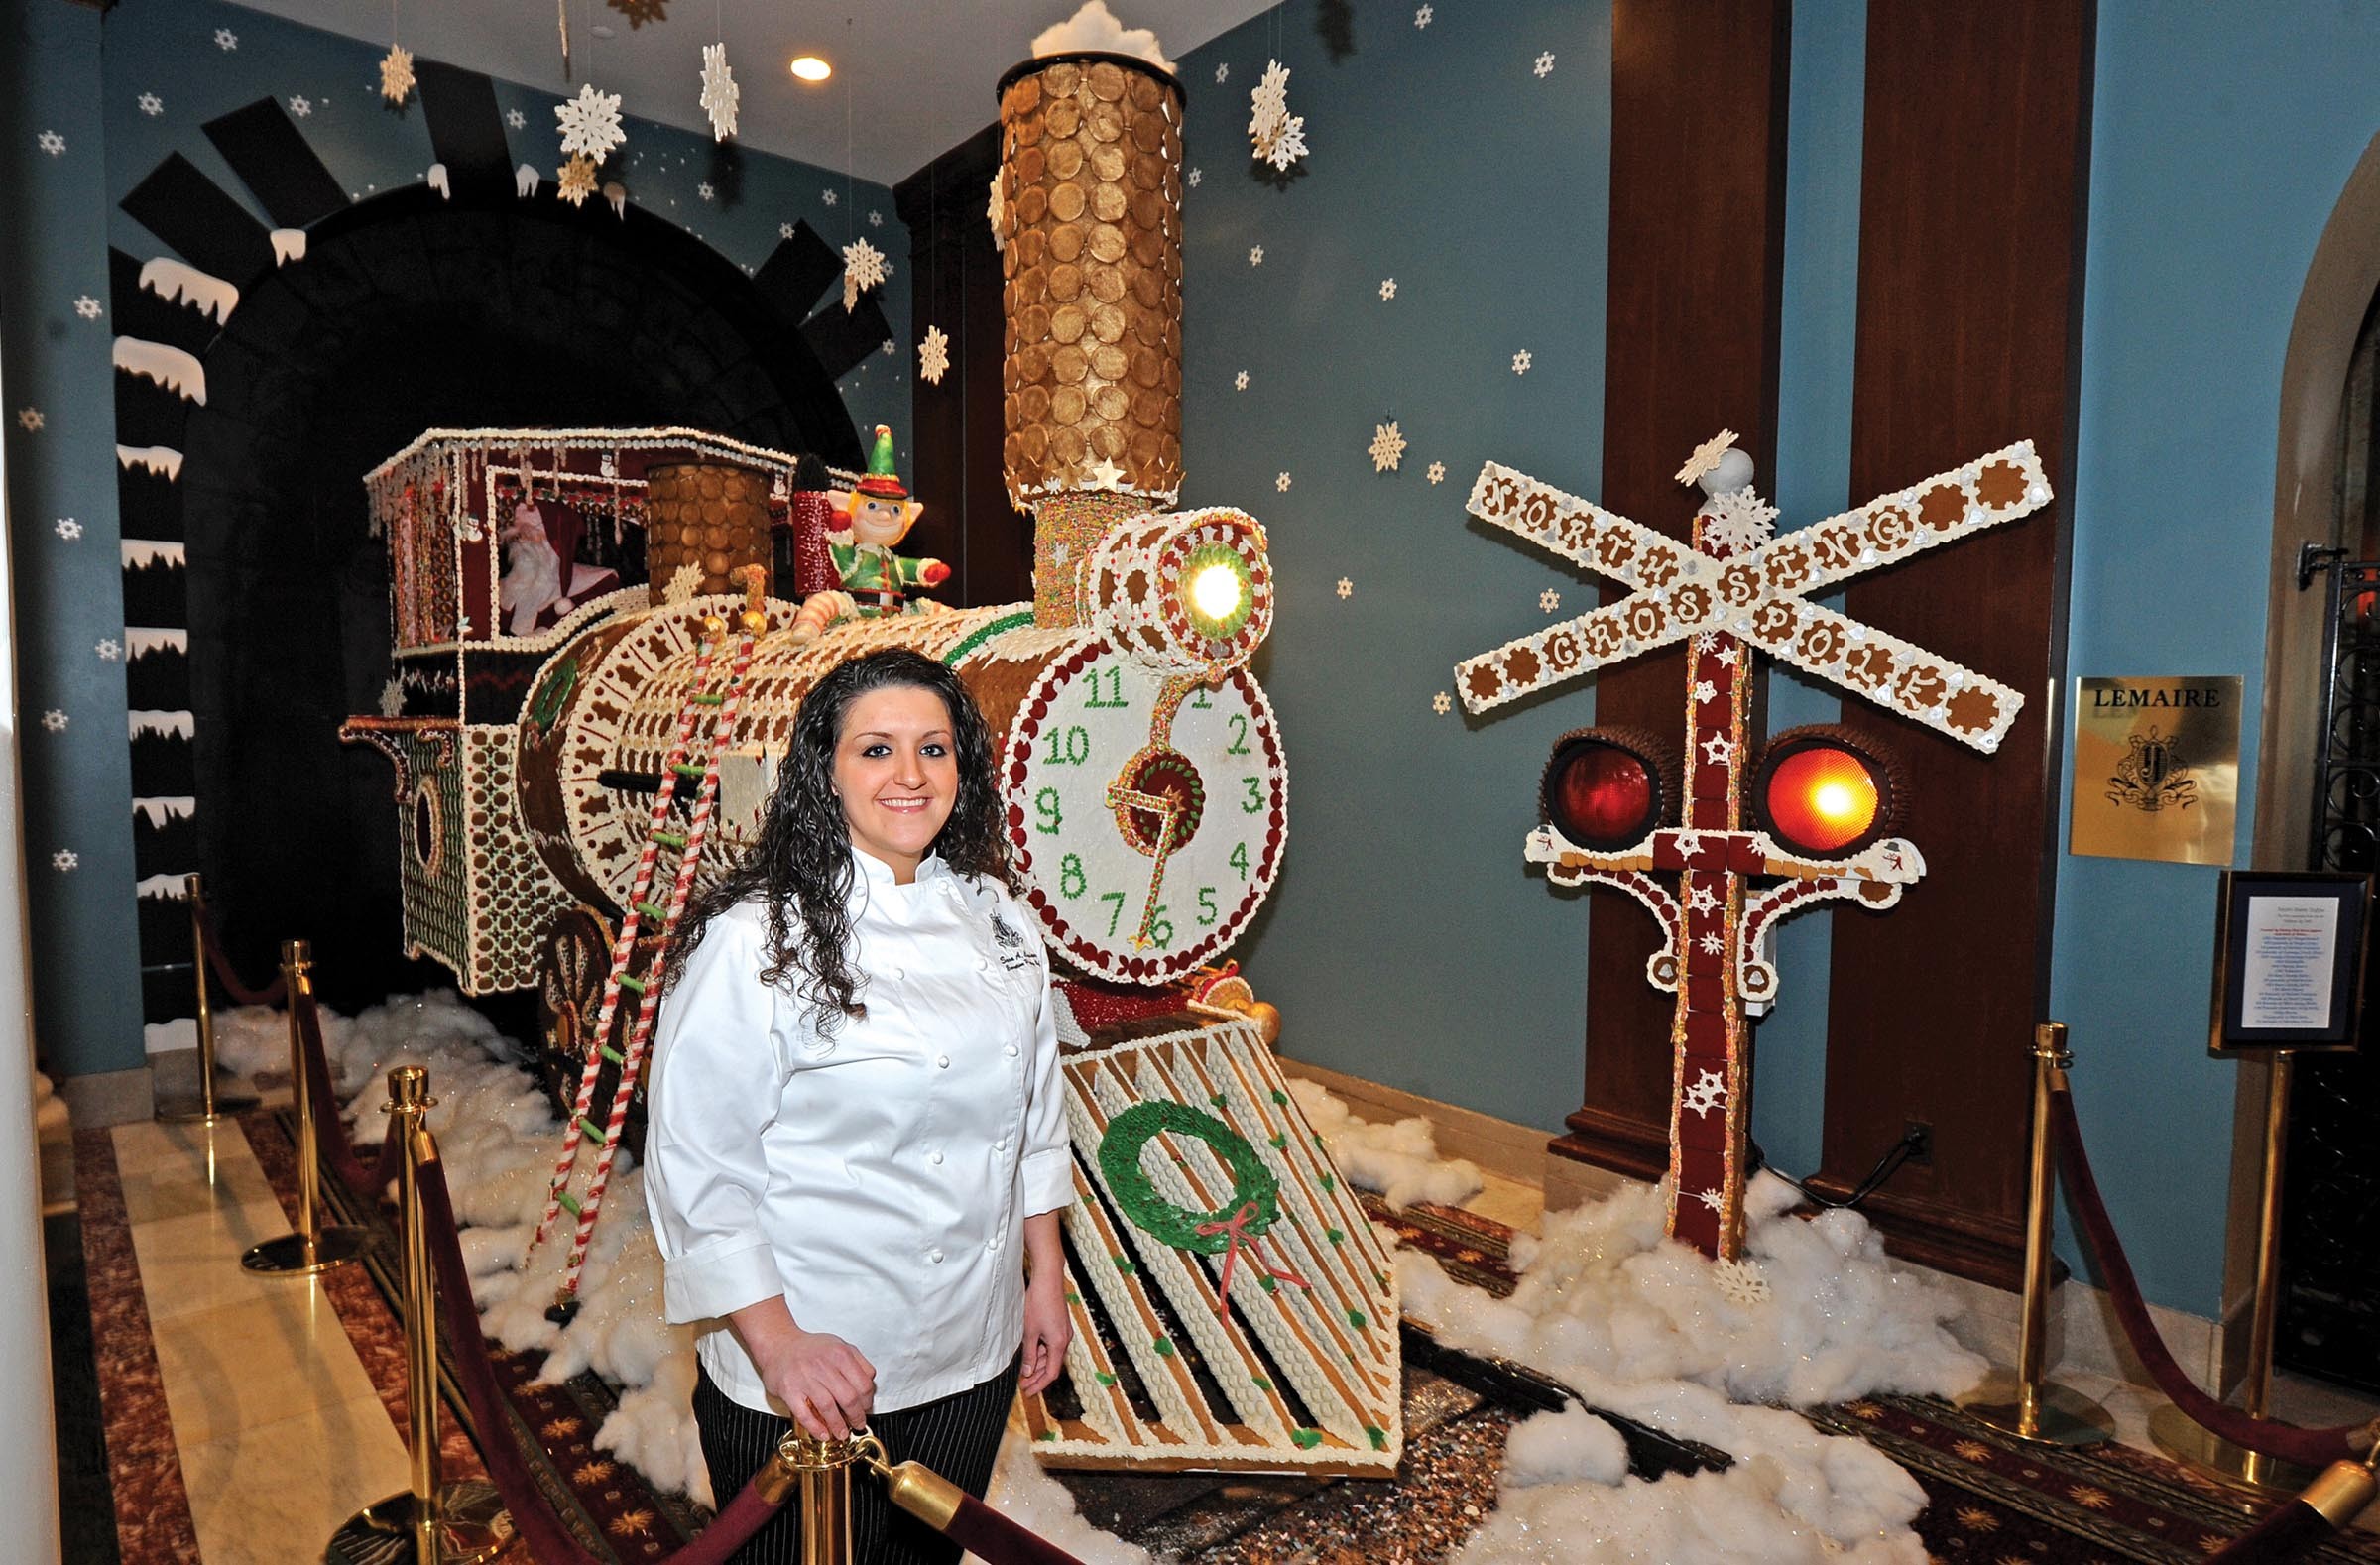 Sara Ayyash says it wasn't easy decorating Santa's steam engine at the Jefferson Hotel, but the results are a hit with visitors. Master carpenter Steve Corwin built the framework. - SCOTT ELMQUIST